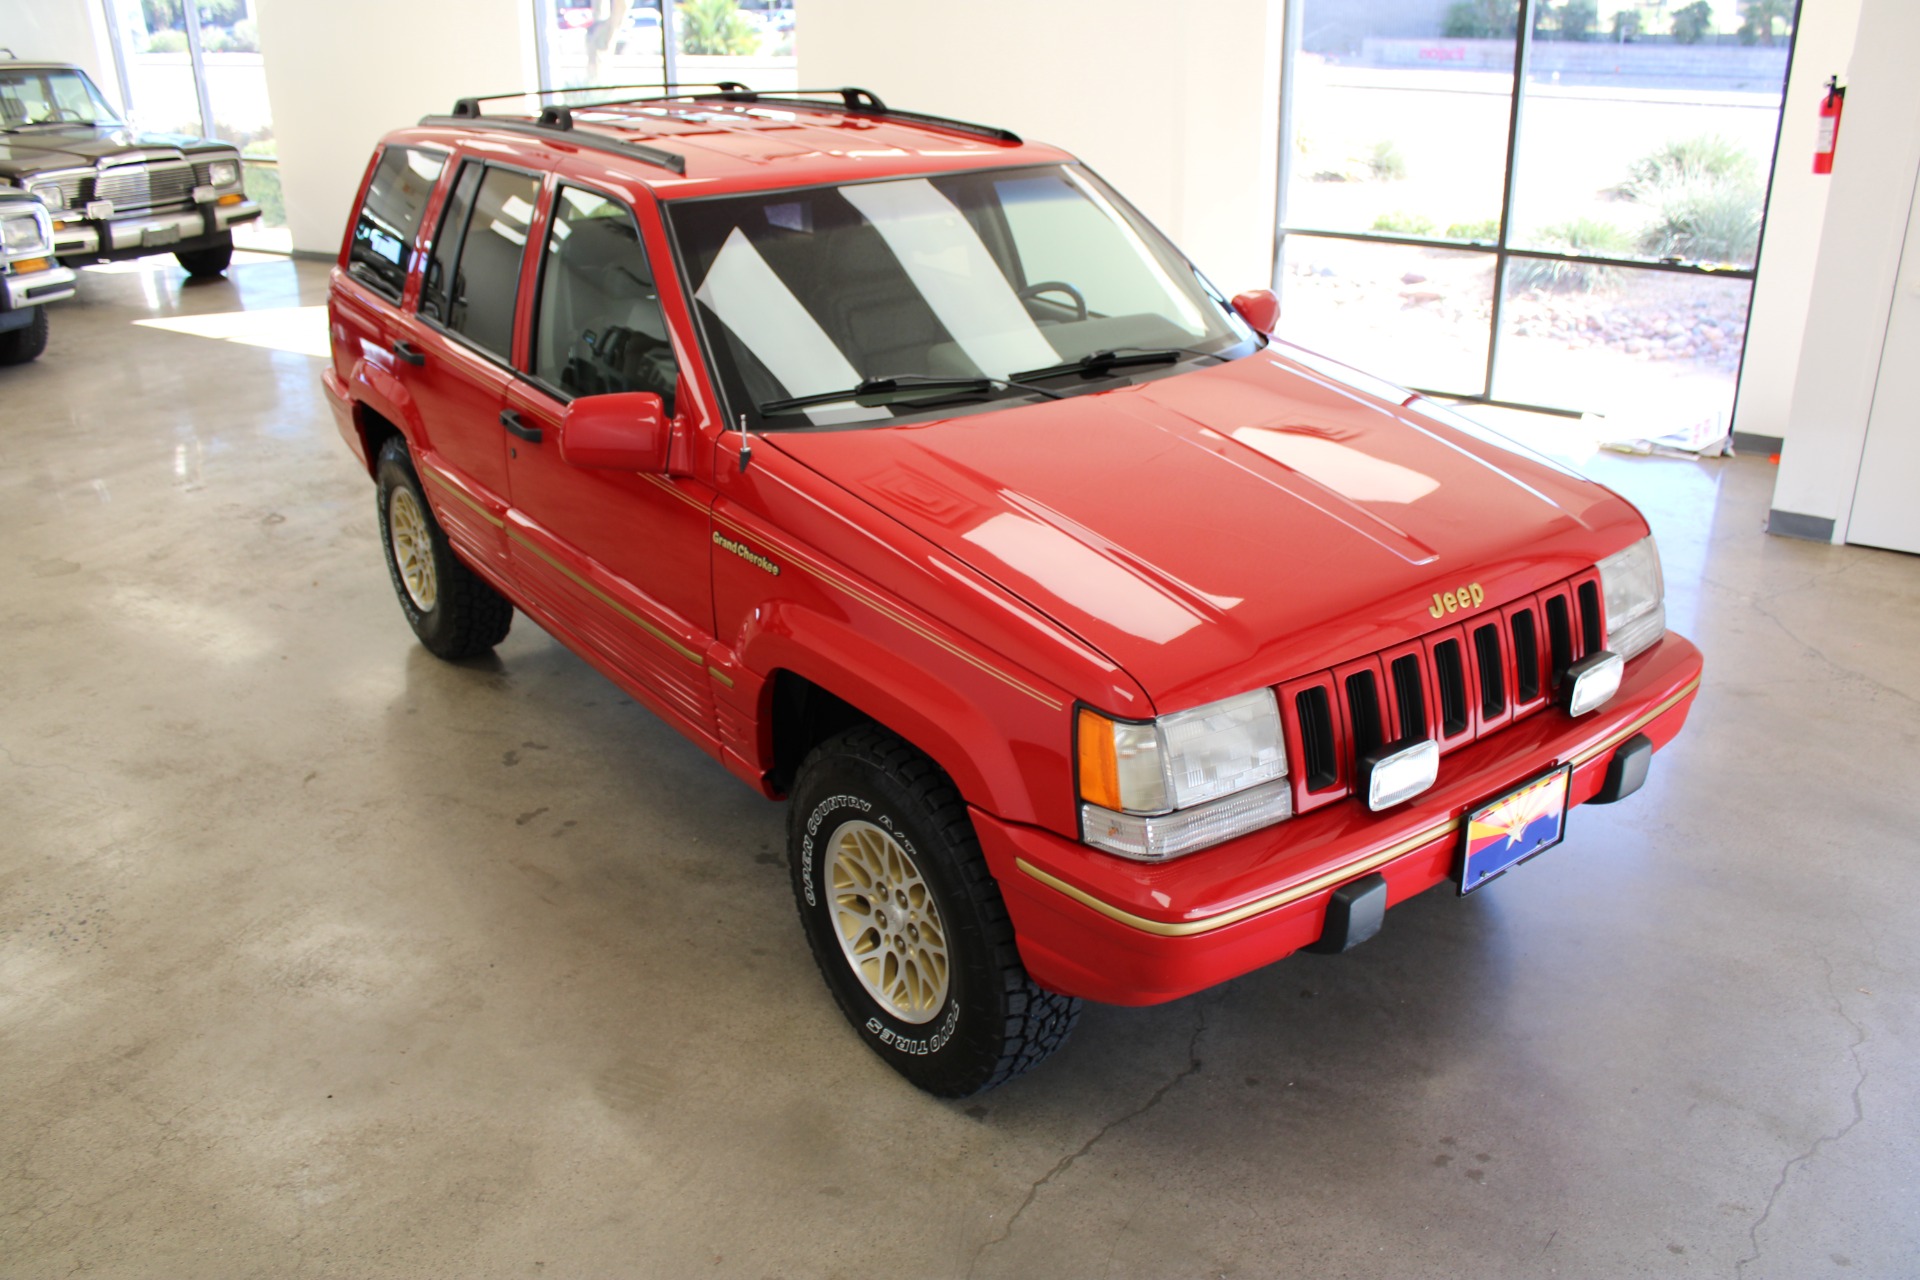 Used-1993-Jeep-Grand-Cherokee-Limited-4X4-Land-Cruiser